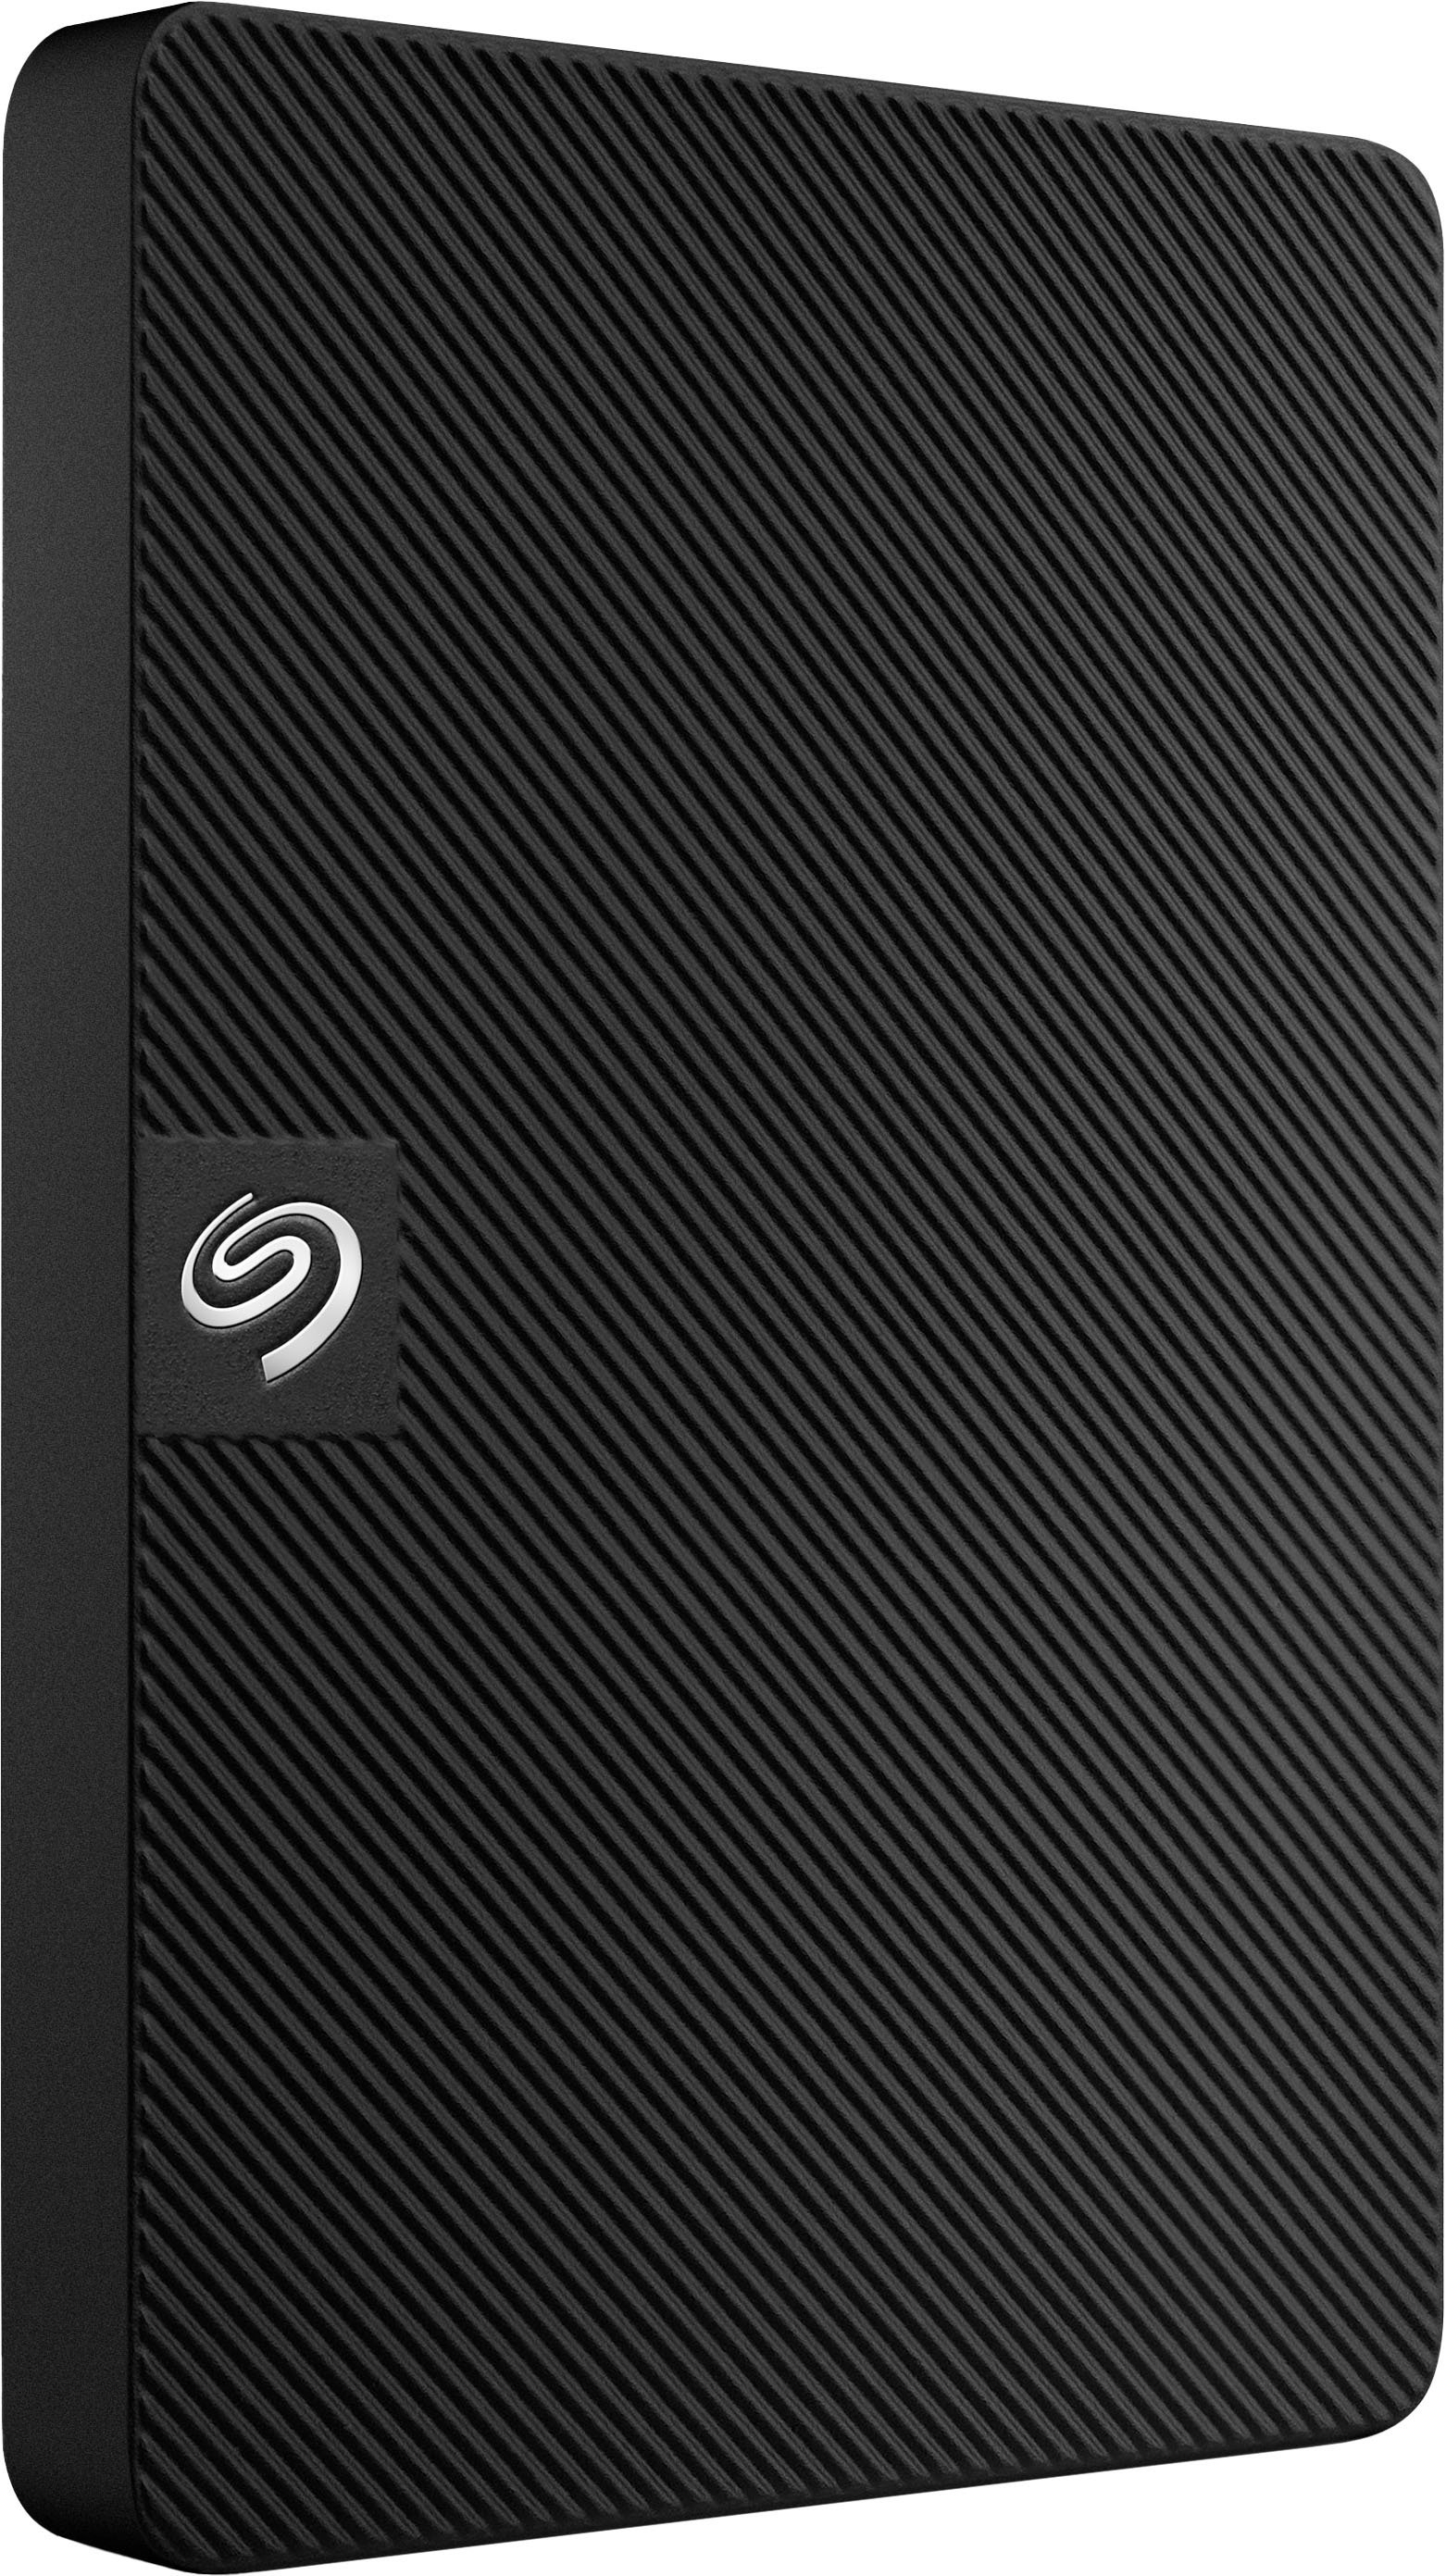 Best Buy: Seagate Expansion 1TB External USB 3.0 Portable Hard